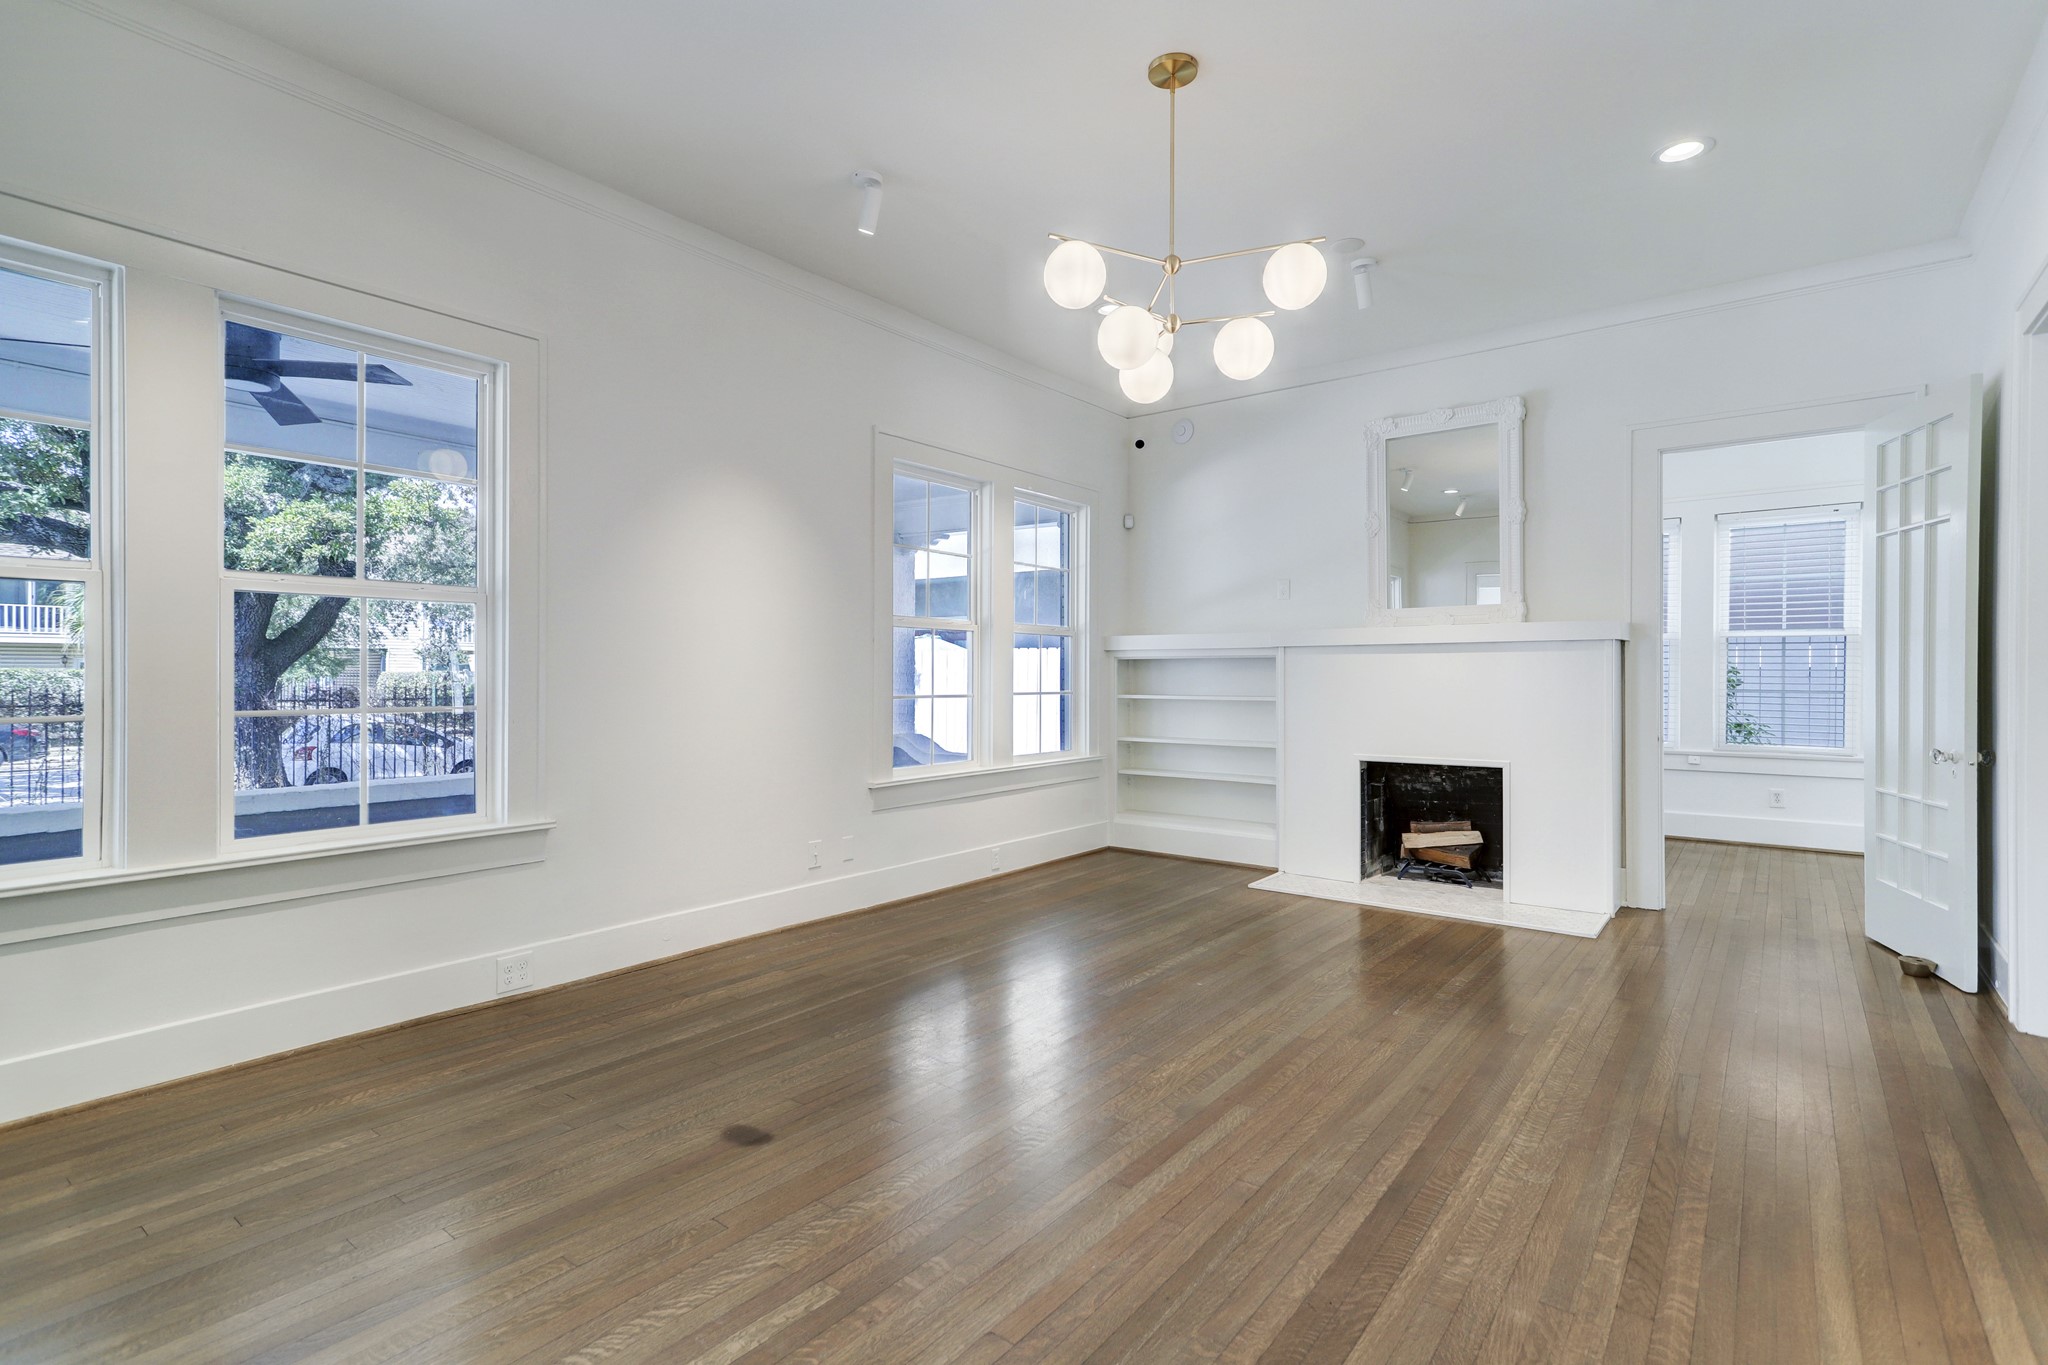 HIGH CEILINGS AND WOOD FLOORS ARE COMPLIMENTED WITH LOTS OF NATURAL LIGHT AND A COZY FIREPLACE!